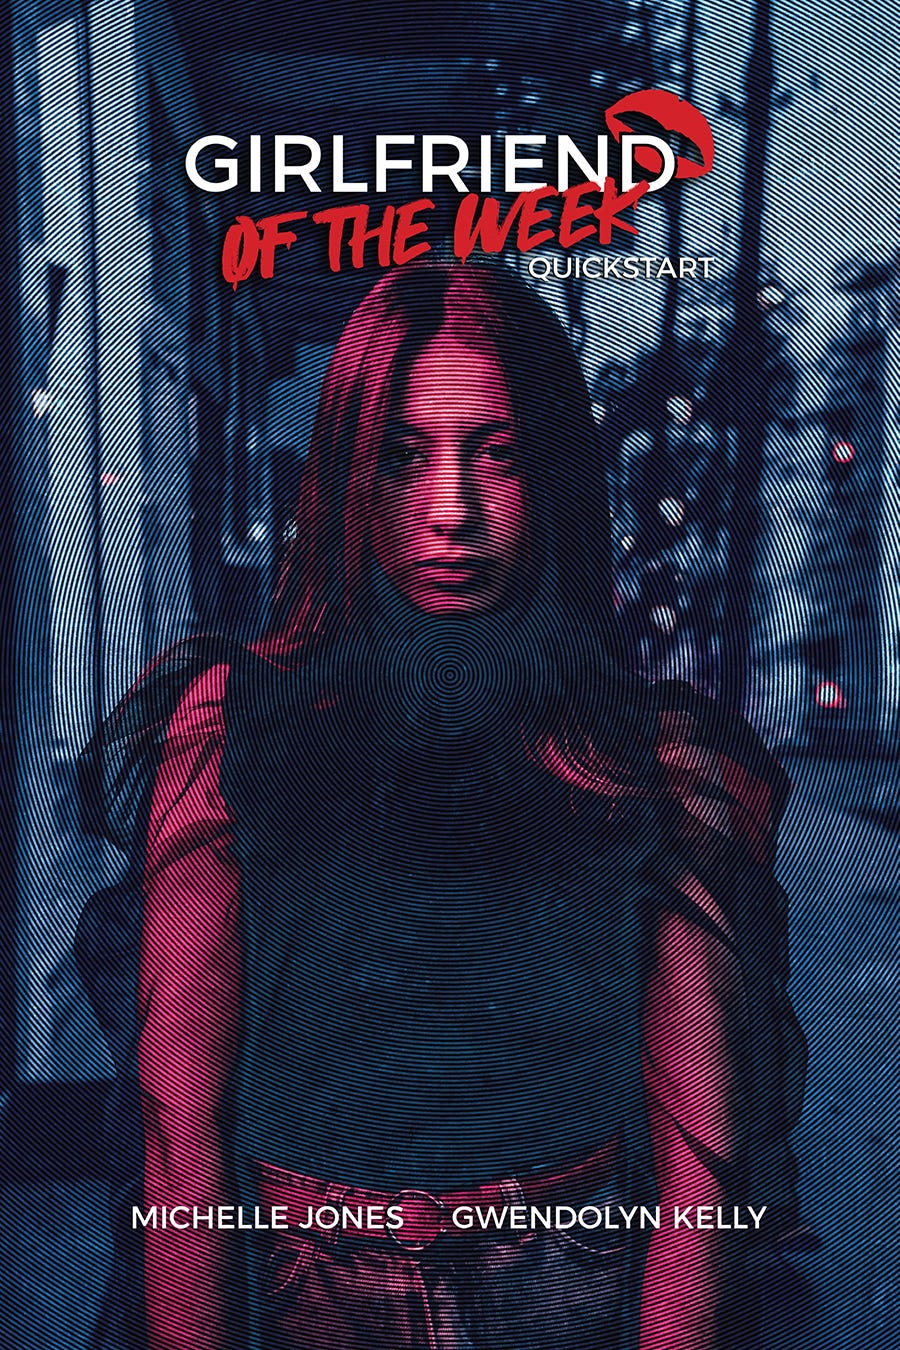 Girlfriend of the week quickstart cover. blue and pink image of a "girlfriend" on the cover